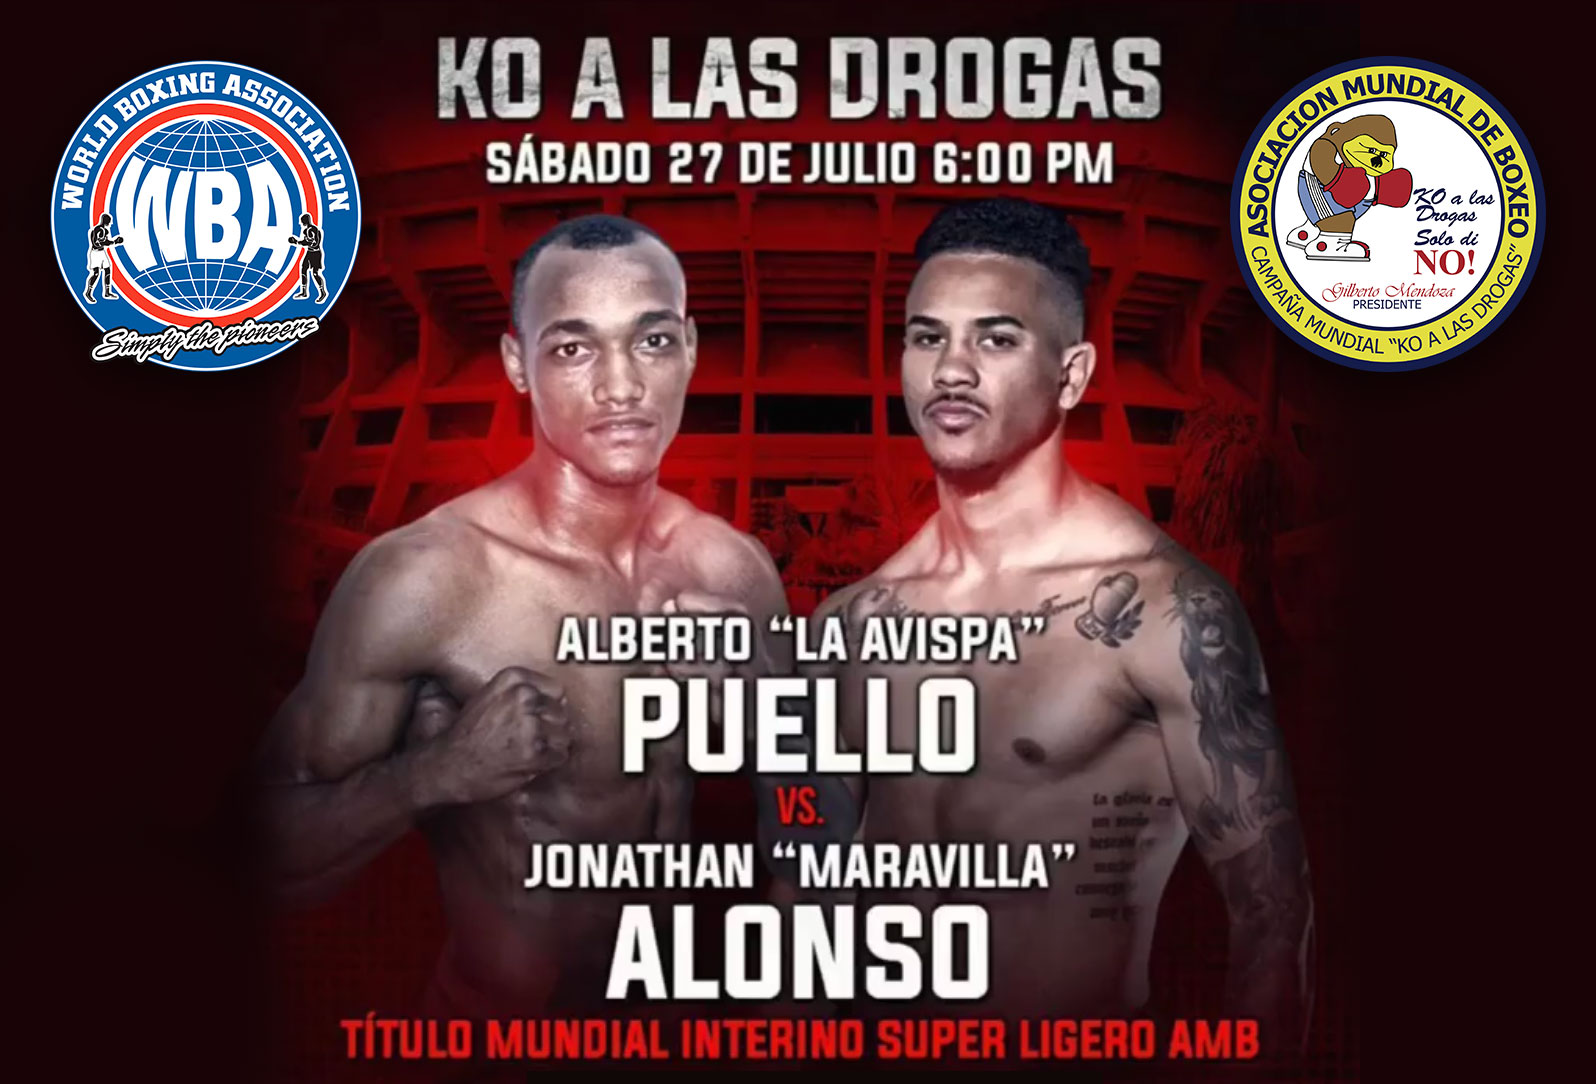 Jonathan Alonso and Alberto Puello are excited to fight for the WBA Interim Title on KO to Drugs card